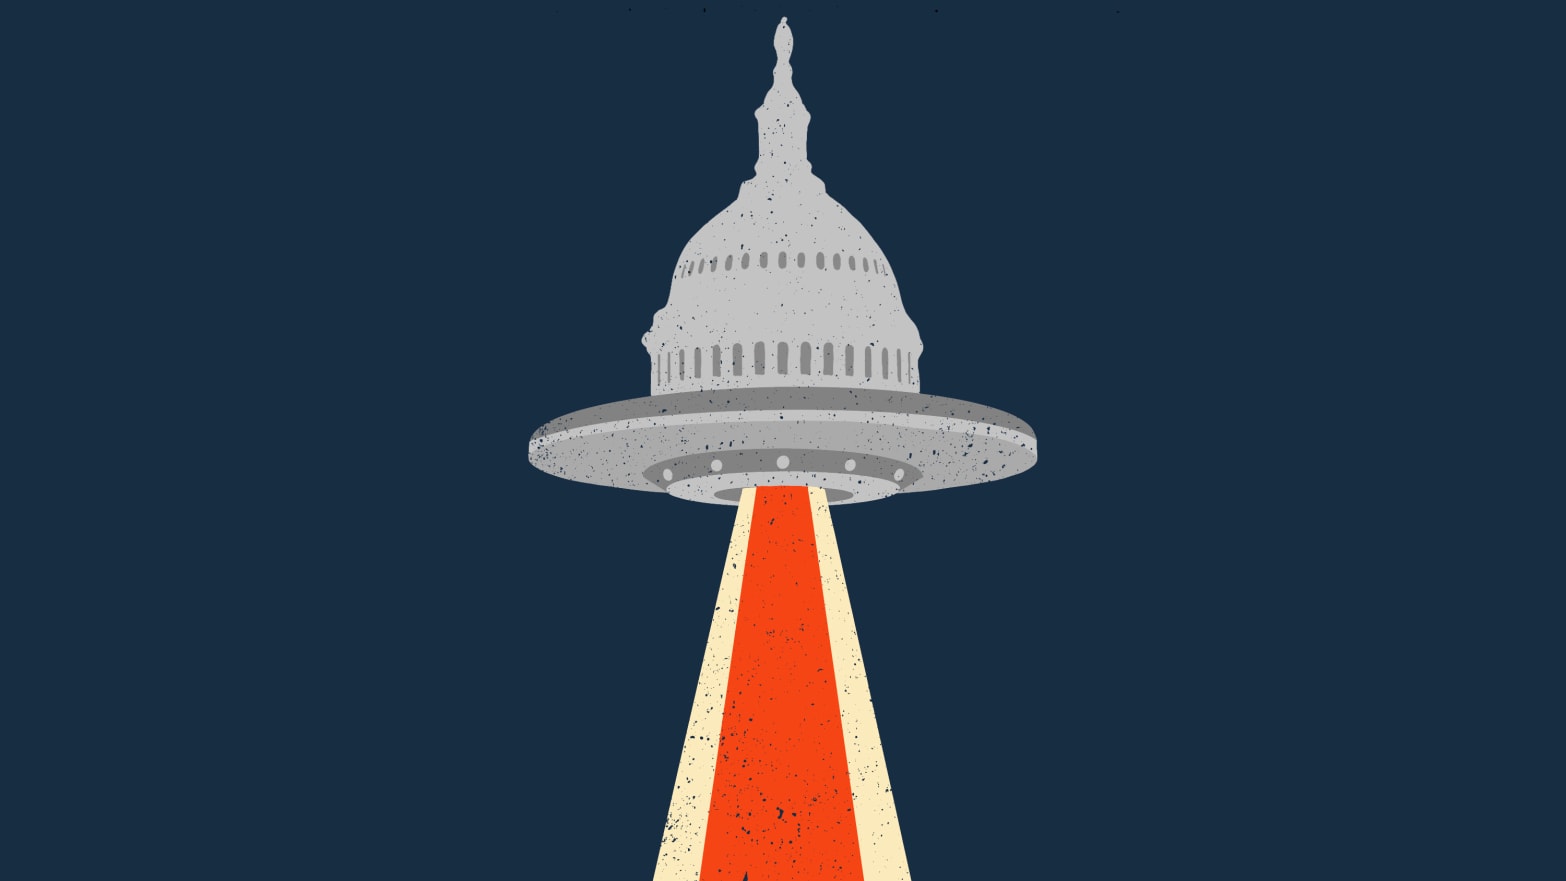 An illustration of the US Capitol building as a flying saucer.